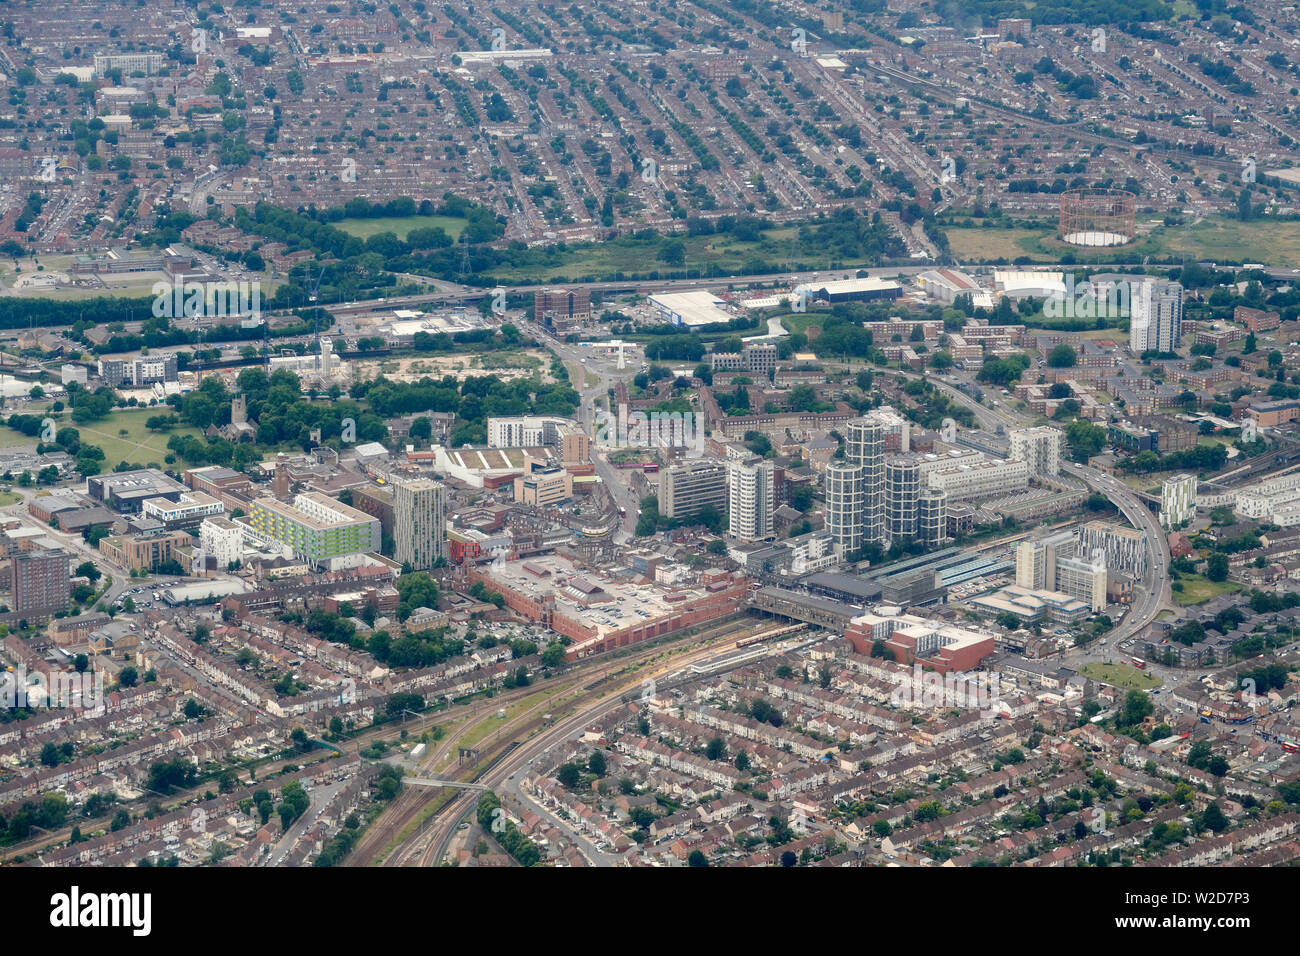 A high level view of Barking, East London, UK Stock Photo